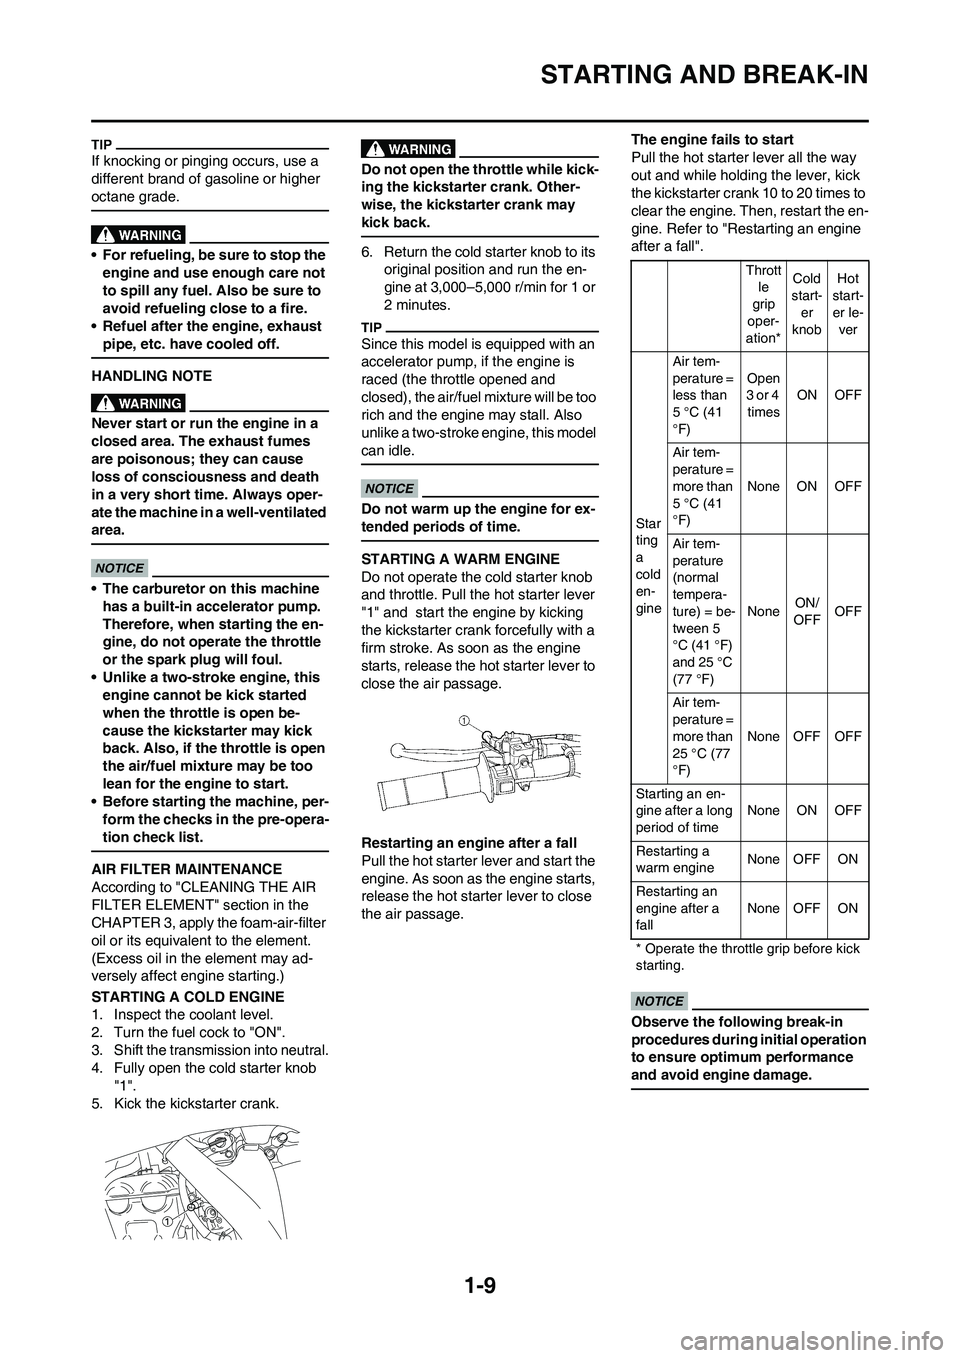 YAMAHA YZ450F 2009 User Guide 1-9
STARTING AND BREAK-IN
If knocking or pinging occurs, use a 
different brand of gasoline or higher 
octane grade.
• For refueling, be sure to stop the 
engine and use enough care not 
to spill an